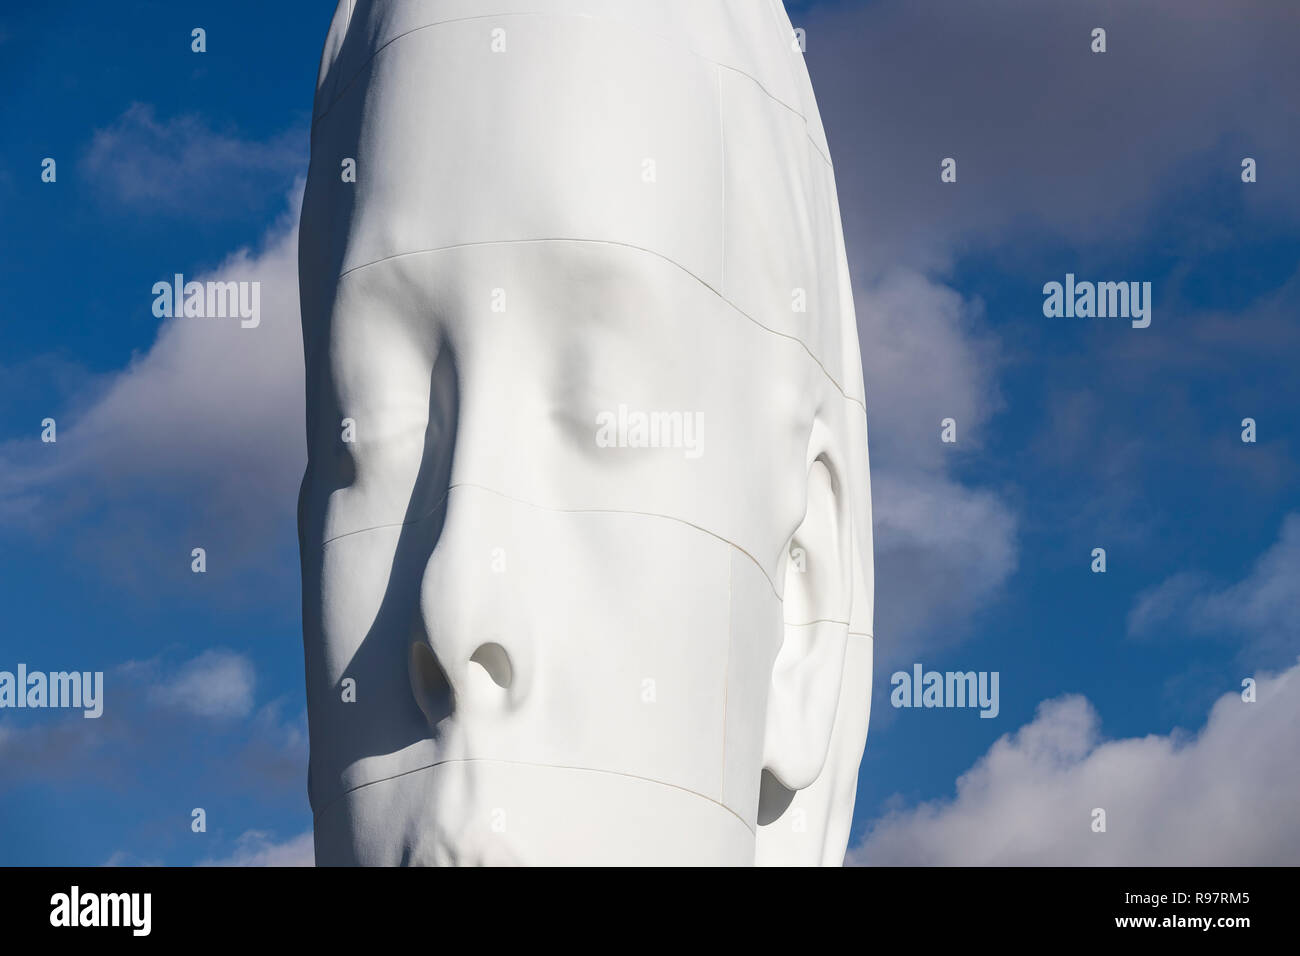 Girl with eyes closed eyes of Face detail of Julia, white marble sculpture by Jaume Plensa in Plaza Colon, Madrid, Spain Stock Photo